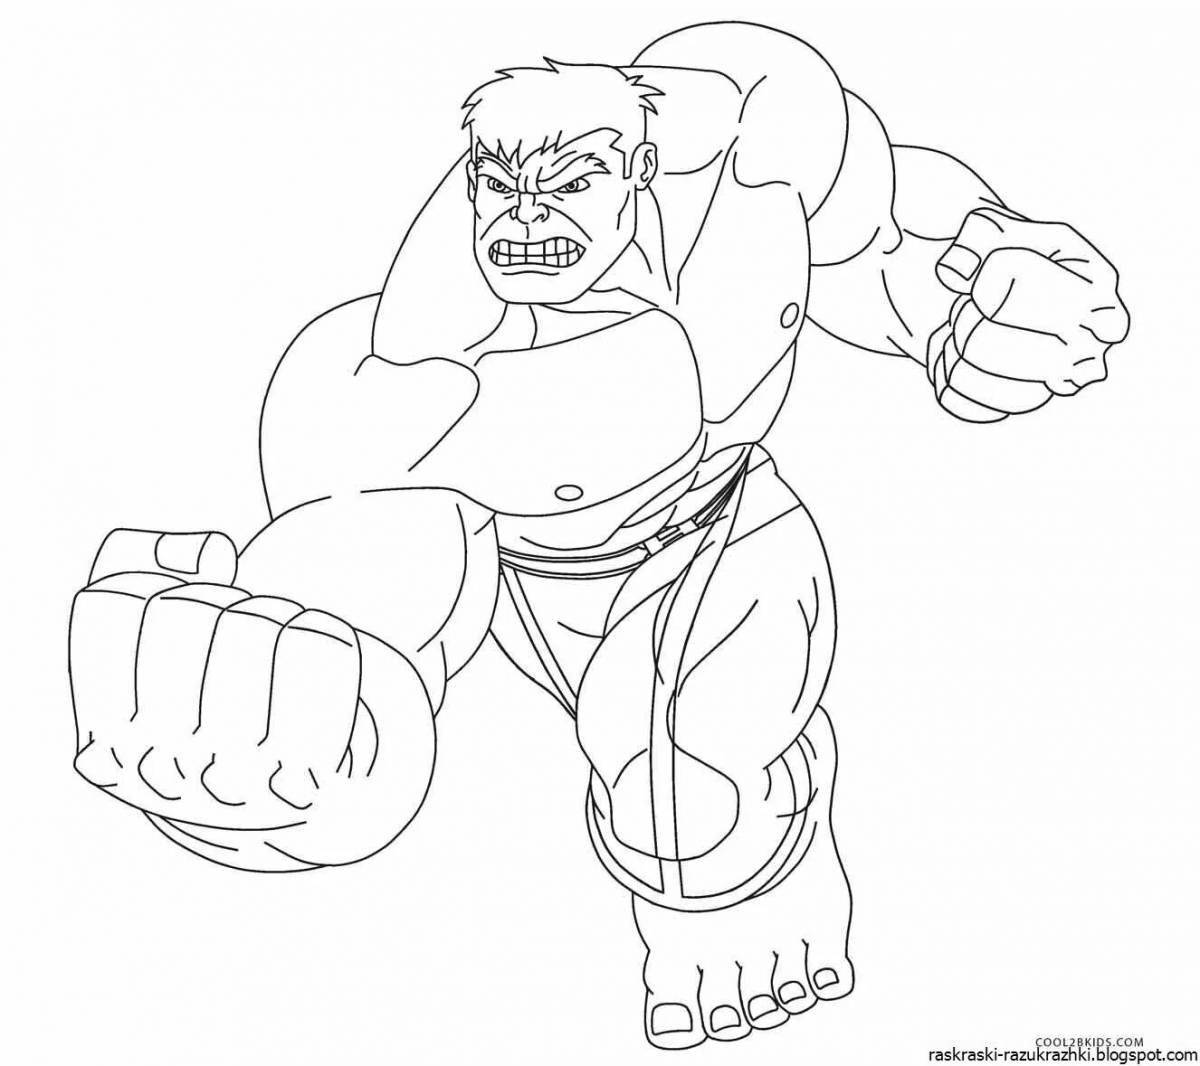 Animated hulk coloring book for kids